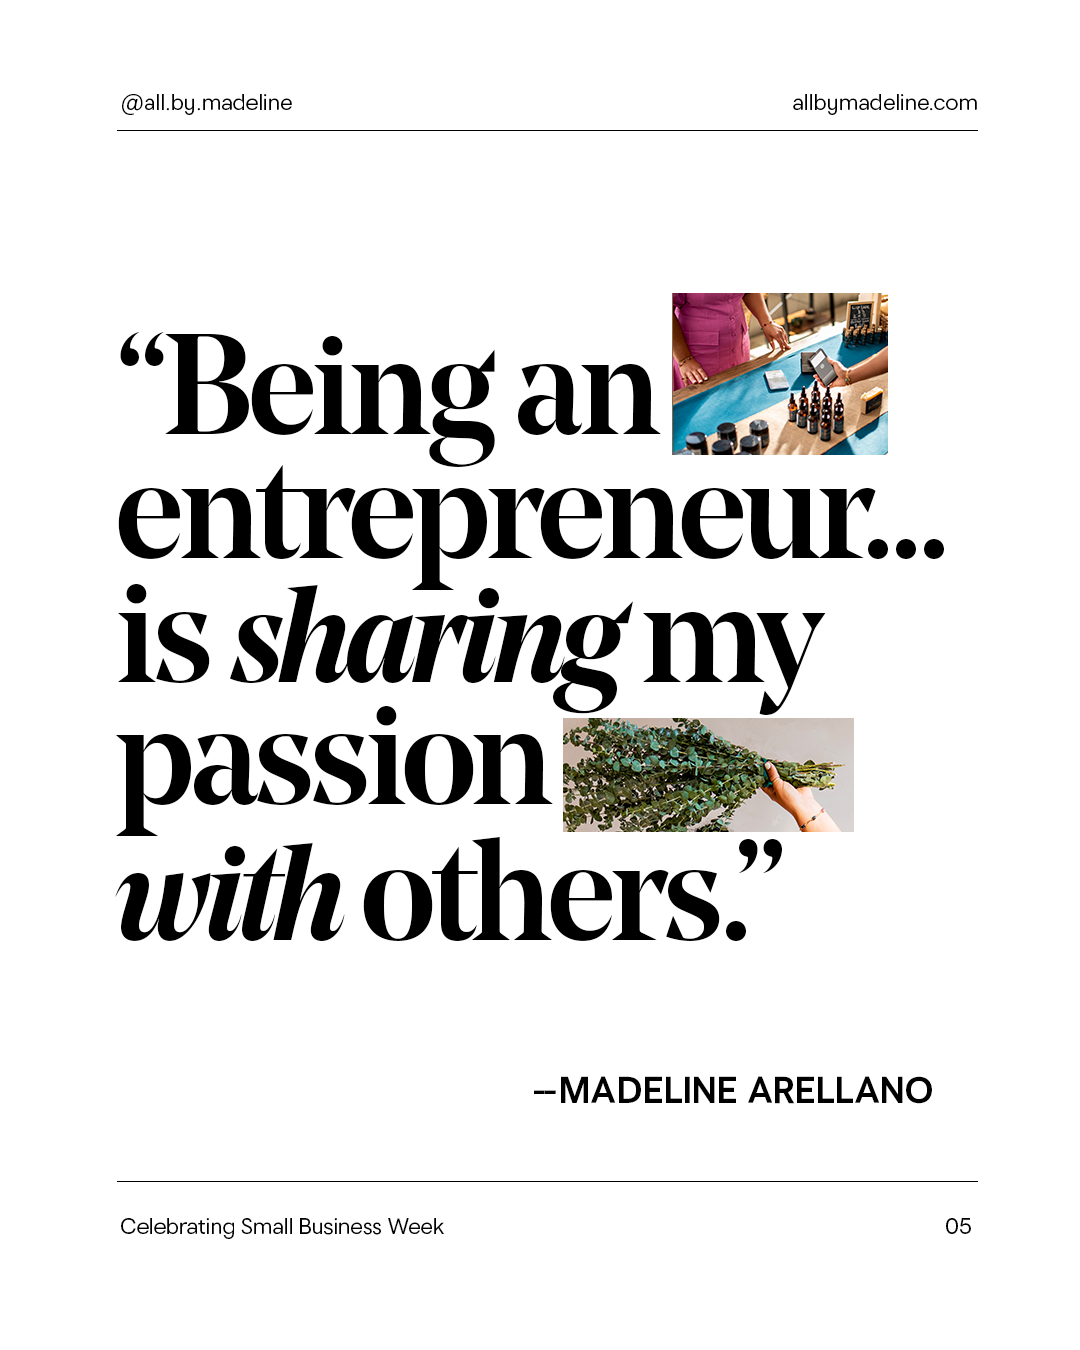 Being an entrepreneur is sharing my passion with others.